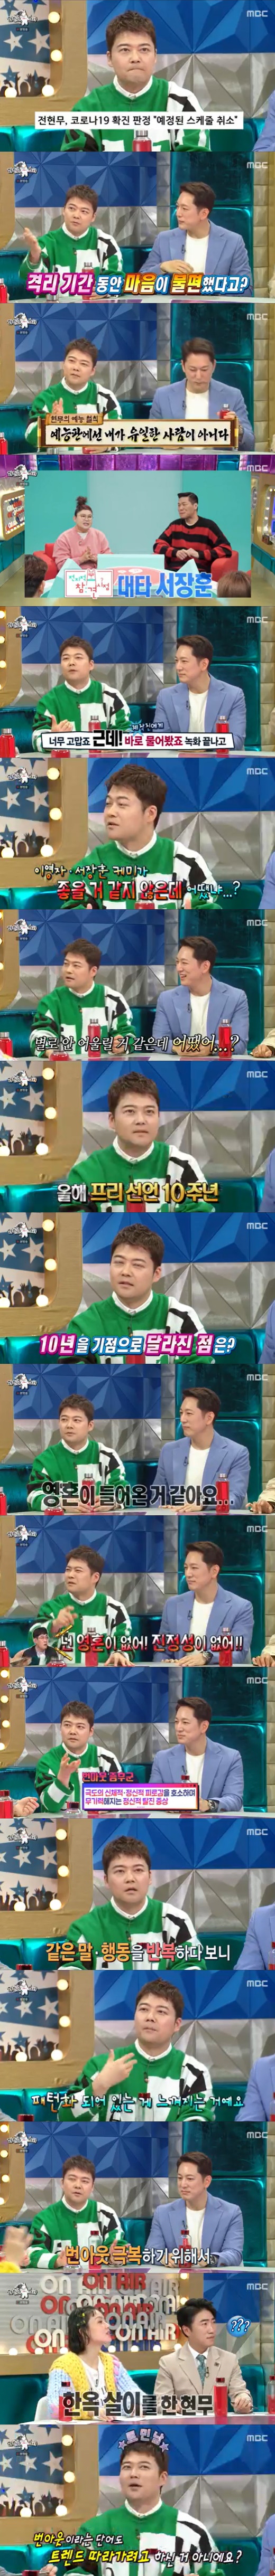 On Radio Star, Jun Hyun-moo showed off her frankly plain dedication.MBC Radio Star, which was broadcasted on the afternoon of the 13th, was featured as Those who read trend.Broadcasters Jun Hyun-moo and Han Seok-joon, Winner member Song Min-ho, and webtoon writer Yuongi appeared as guests.On this day, Jun Hyun-moo said, I was isolated by COVID-19 confirmation a while ago, but I was very uncomfortable at that time?I am not the only person in the entertainment edition. There are too many substitutes. Gim Gu-ra was also tested positive for COVID-19, and comedian Jang Dong-min filled the vacancy as a special MC. Jun Hyun-moo said, Its okay to see here.I can not feel the vacancy of Gim Gu-ra already. I should not empty it. In the meantime, Jun Hyun-moo said, Fortunately, I was relieved that there was not much recording during the isolation period.But just before the Power of Potential Interference, Seo Jang-hoon hit the jackpot, which was so thankful, and I asked the crew immediately after the recording.I dont think Lee Young-ja and Seo Jang-hoon Chemie would be good. I thought they werent going to fit together.Of course, I would have said that I was going to make you feel good, but I was so grateful for that word. Even with a lot of fixed pros, its left-handed. The entertainment community shouldnt be empty; anyone can replace me, he reiterated.Jun Hyun-moo, who celebrated the 10th anniversary of the pre-declaration this year, said, Its 10 years since Ive been in the soul.There have been a lot of broadcasts, so without souls, the pattern has lived like a machine for 10 years.Lee Kyung-gyu told me, You do not have a soul every day, so I wanted to say why did you do that? Now I know why.Its been about 10 years, so even if you broadcast one broadcast, even if its less funny, you think its lets be authentic.I used to think of funny things, and when someone said funny things, I asked them to look like my words. Like hyena.Jun Hyun-moo also confides that the slump had come badly; he said, Its because it doesnt tee on the outside, its Burn In-N-Out Burger.I was grateful, but my pros were old, and I felt that I was too patterned myself, and I was joking, reacting similarly, and I wanted to be a machine.Everyone around me said it was a setting, but Burn In-N-Out Burger came and did a real hanok. I went to Bukchon to find the space that was the most different from the space I lived in. There were so many restaurants and hip places that we did not know.Ive never lived in a hanok before, and all I could hear was the sound of the alley, and I can hear whether the next door was hanging laundry or not, so I didnt even set the alarm for a month.I was lying on the floor of Daecheong and it was too healing. I wanted to store it in ASMR because it was so good. Soon Jun Hyun-moo said, But I can not live at all. One month is just good. In-N-Out Burger was a hot term.I have to go through it once, so I am a person these days. 